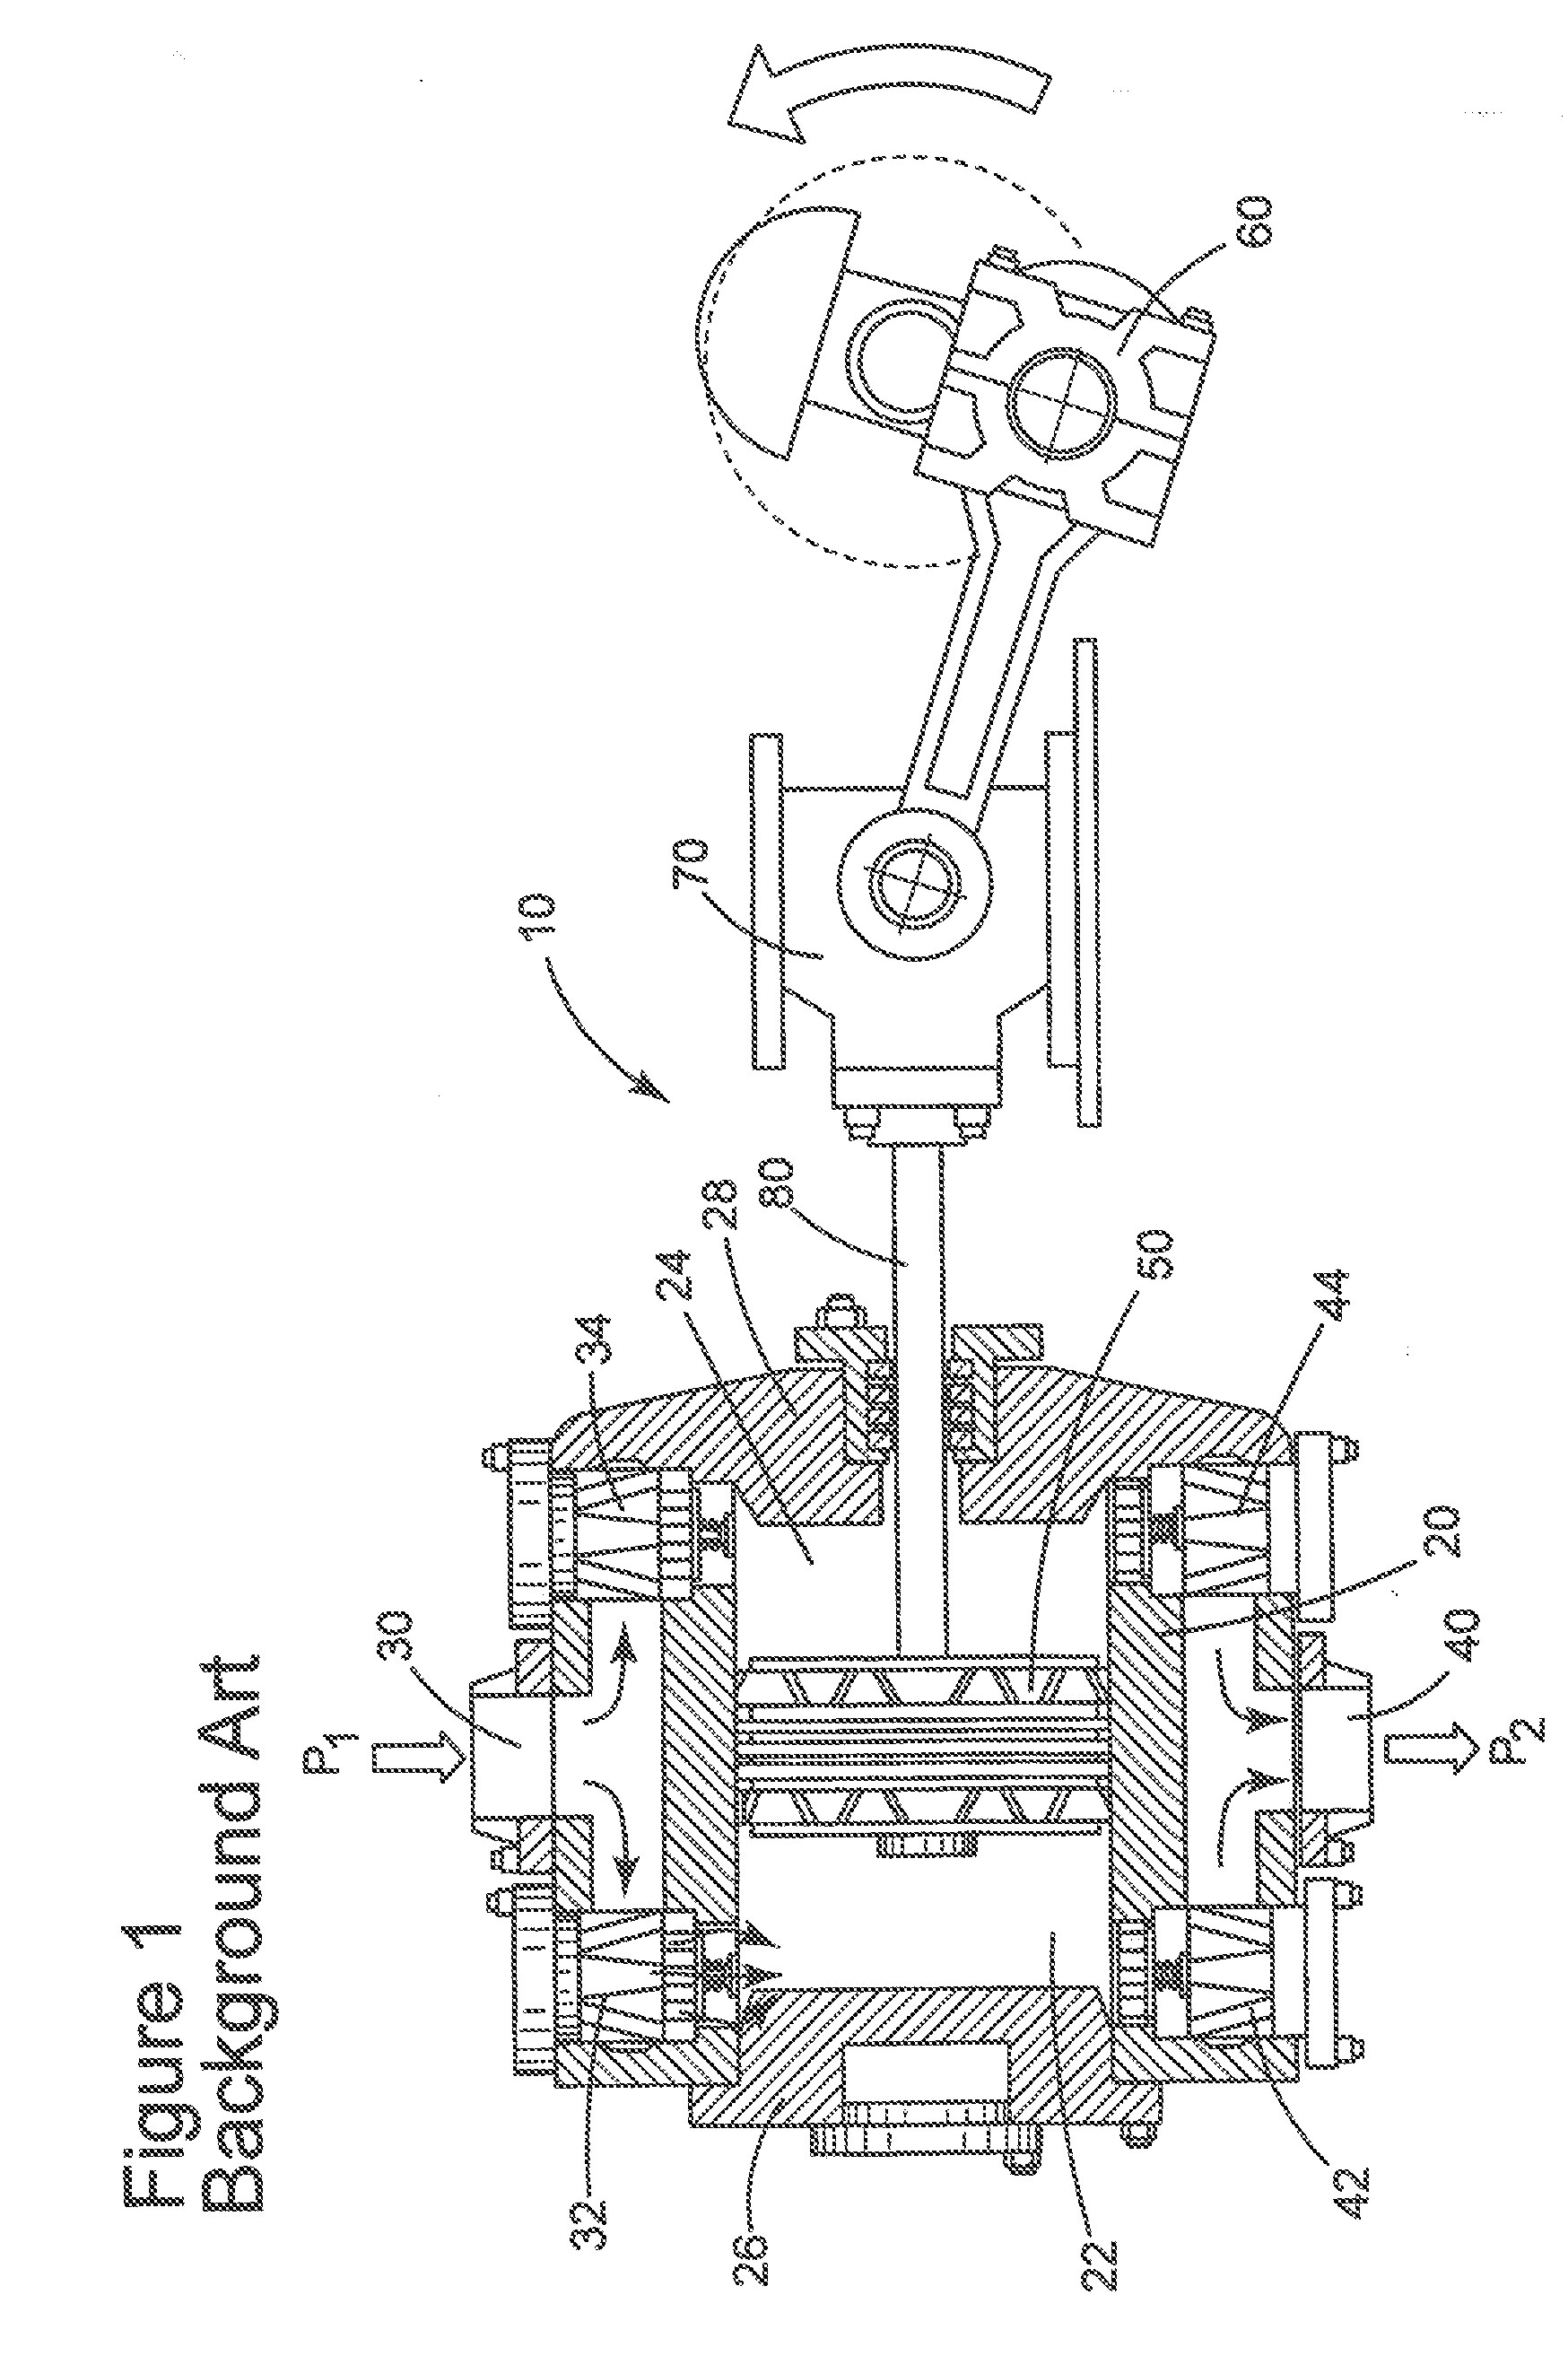 Reciprocating compressors having timing valves and related methods